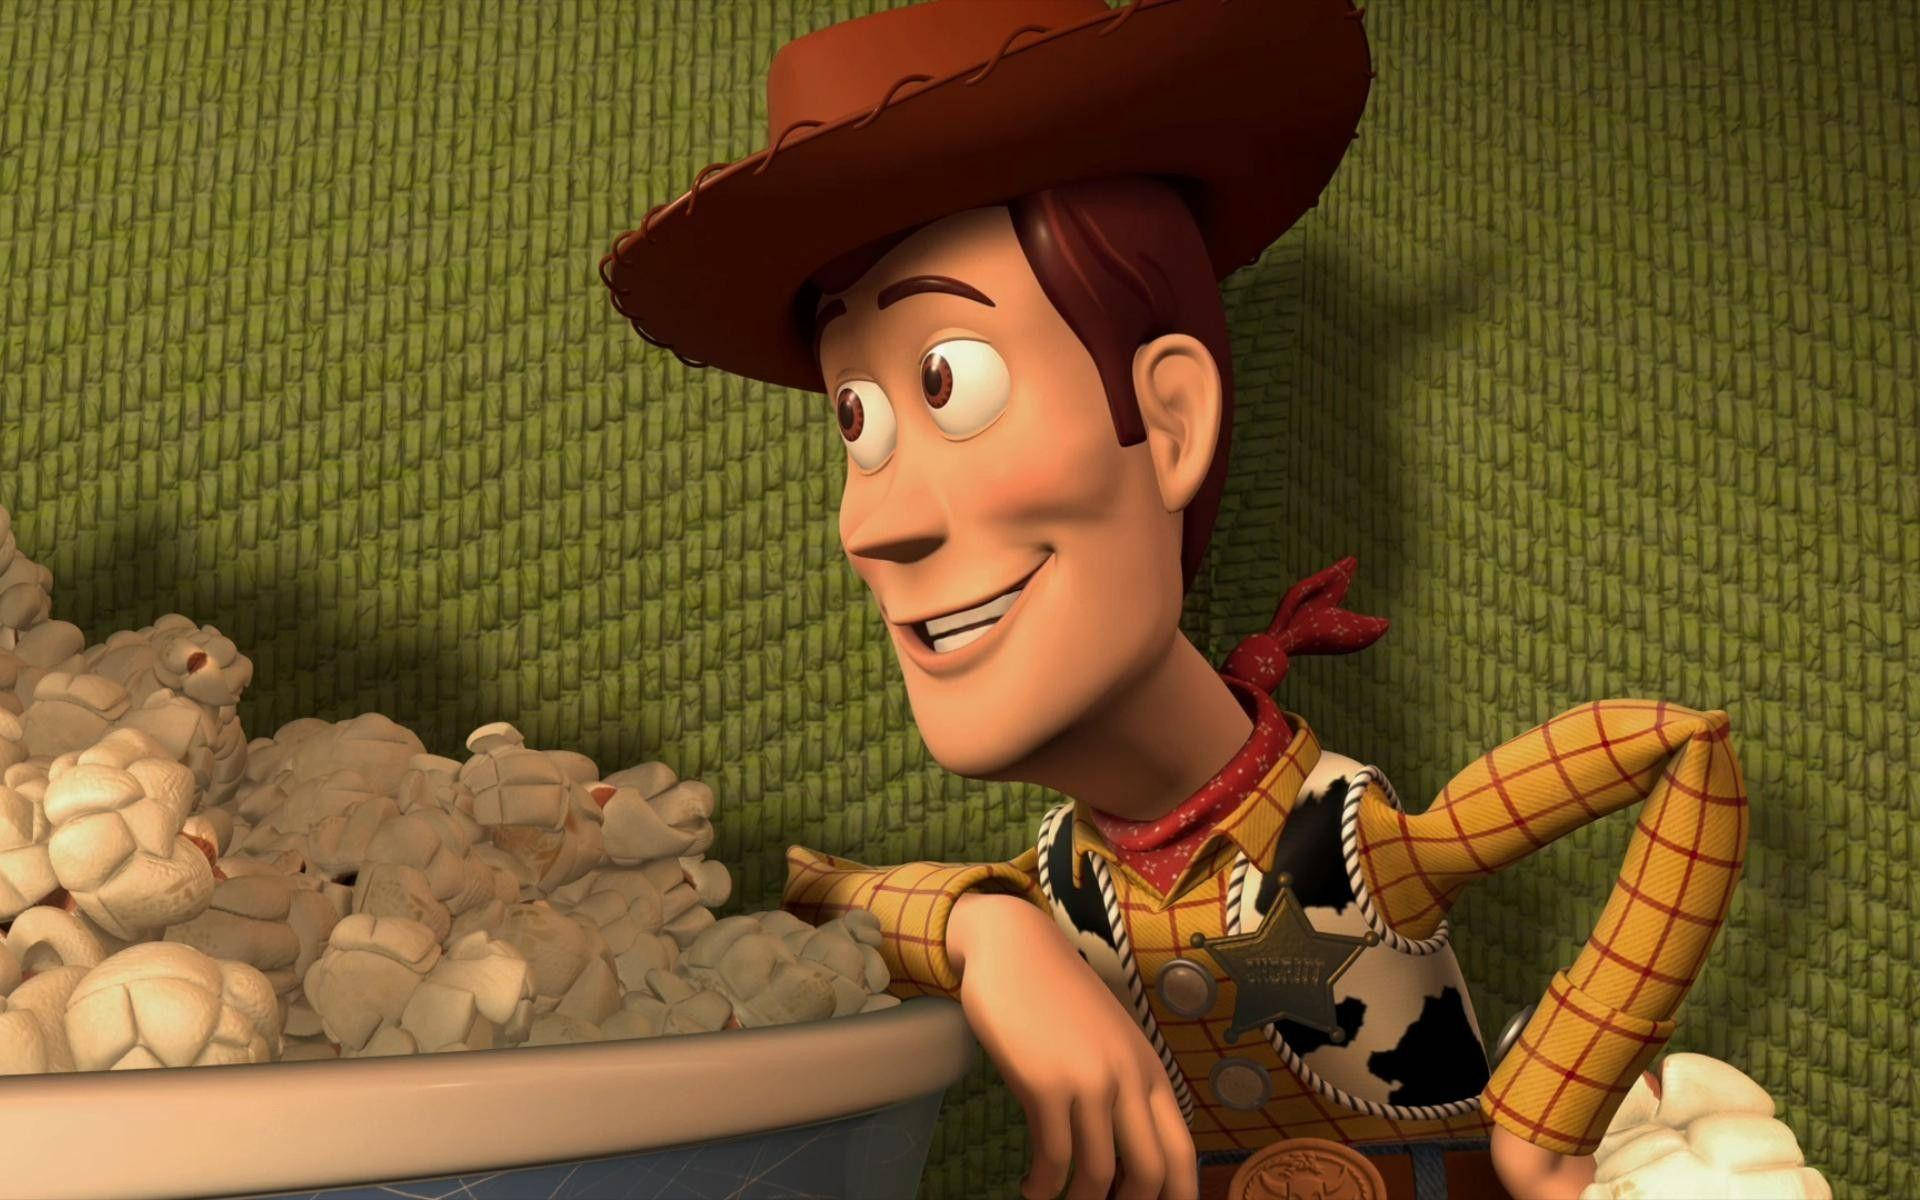 Woody With Popcorn Wallpaper